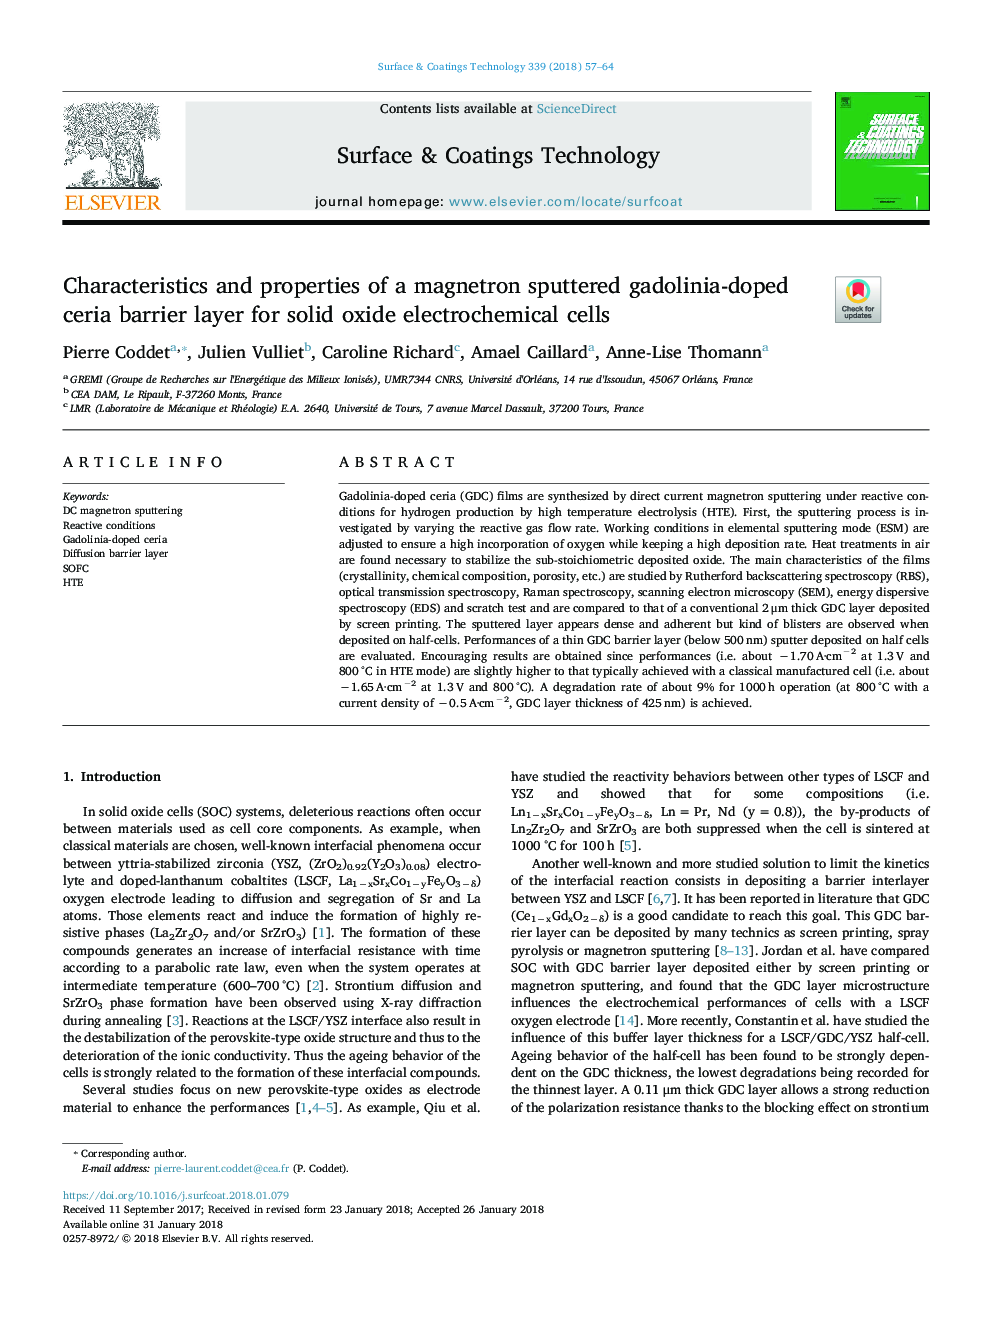 Characteristics and properties of a magnetron sputtered gadolinia-doped ceria barrier layer for solid oxide electrochemical cells